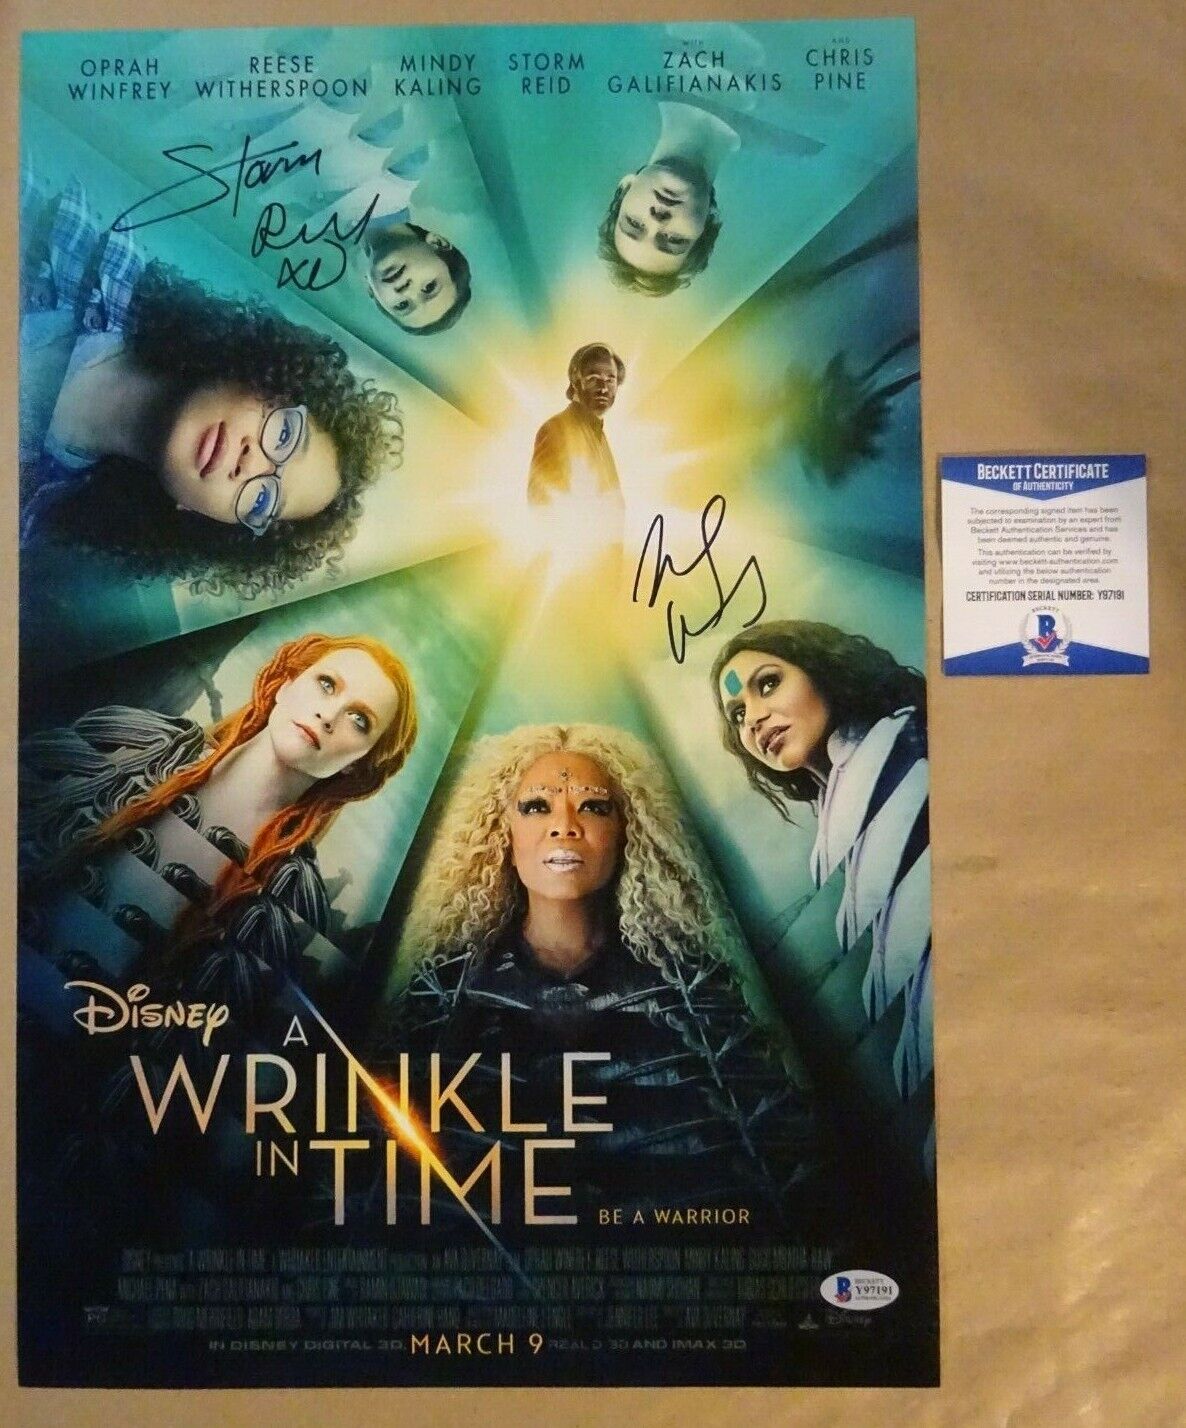 Signed STORM REID & MINDY KALING A WRINKLE IN TIME 12x18